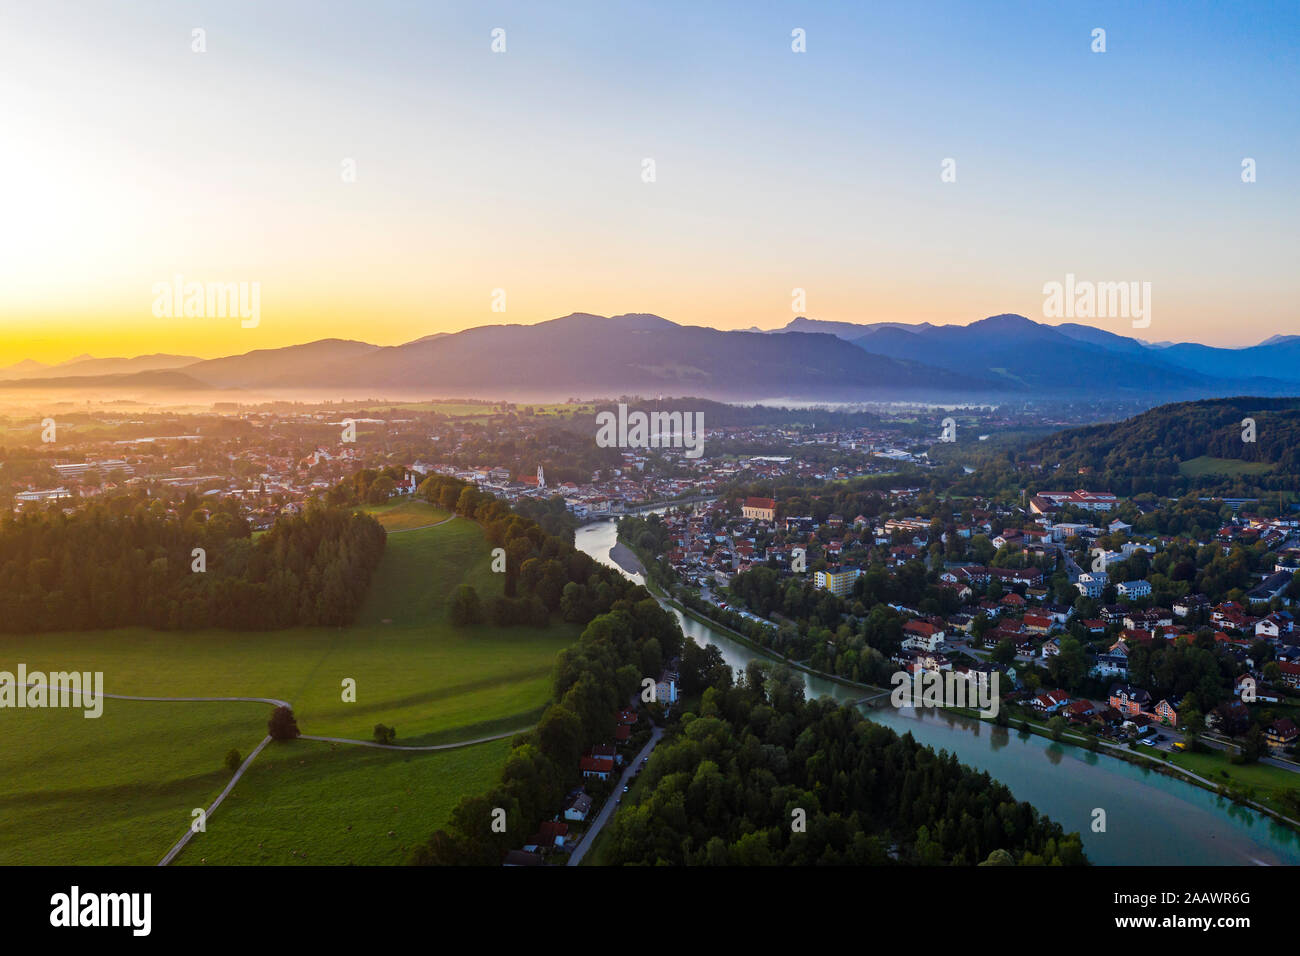 Aerial view of Bad Toelz against clear sky during sunrise, Isarwinkel, Germany Stock Photo